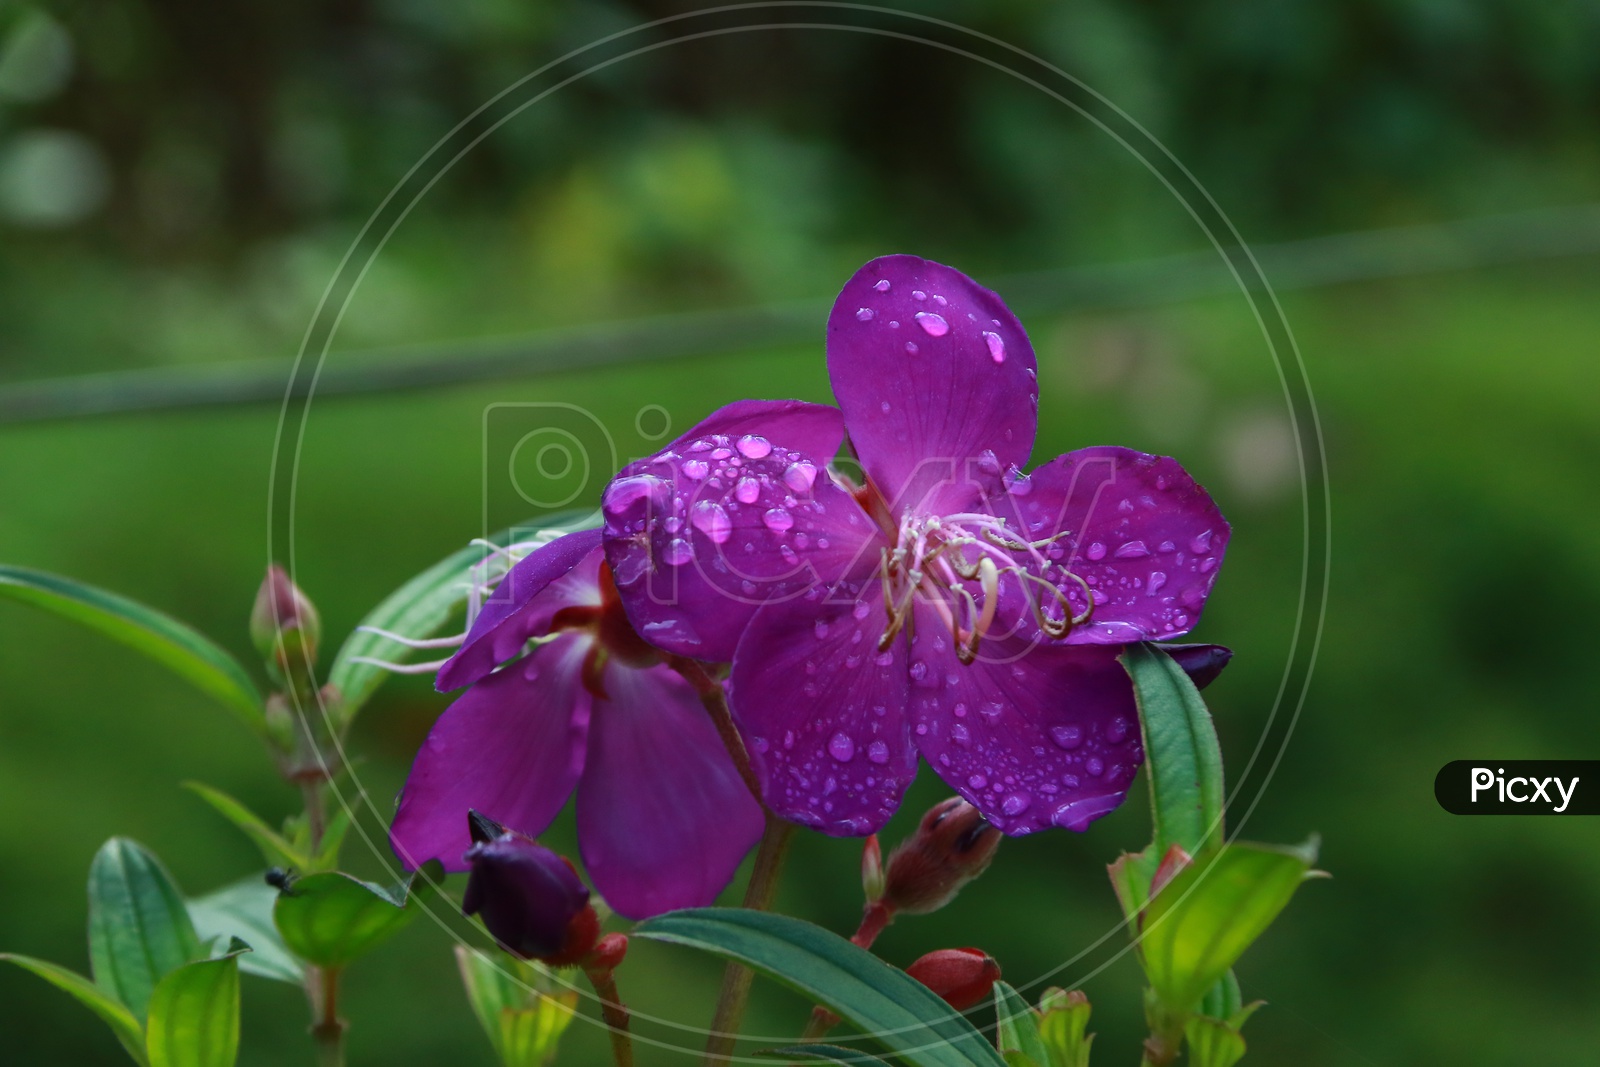 A Purple Rose with Water droplets